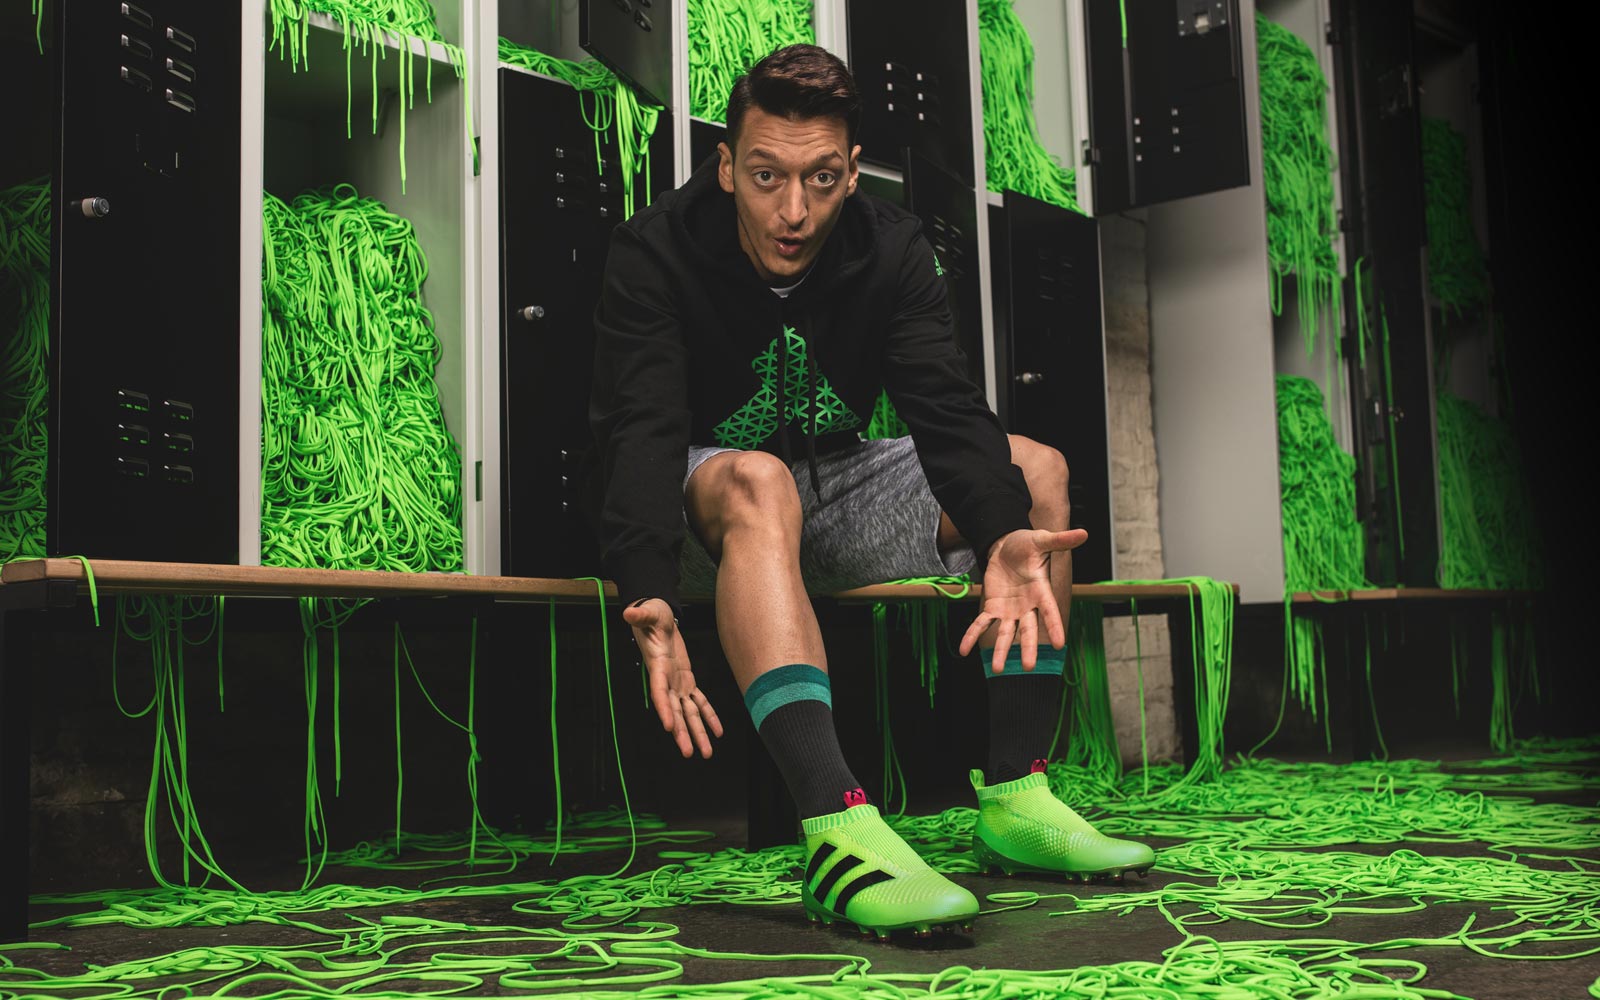 First-Ever Ace 16+ PureControl Boots Released - Footy